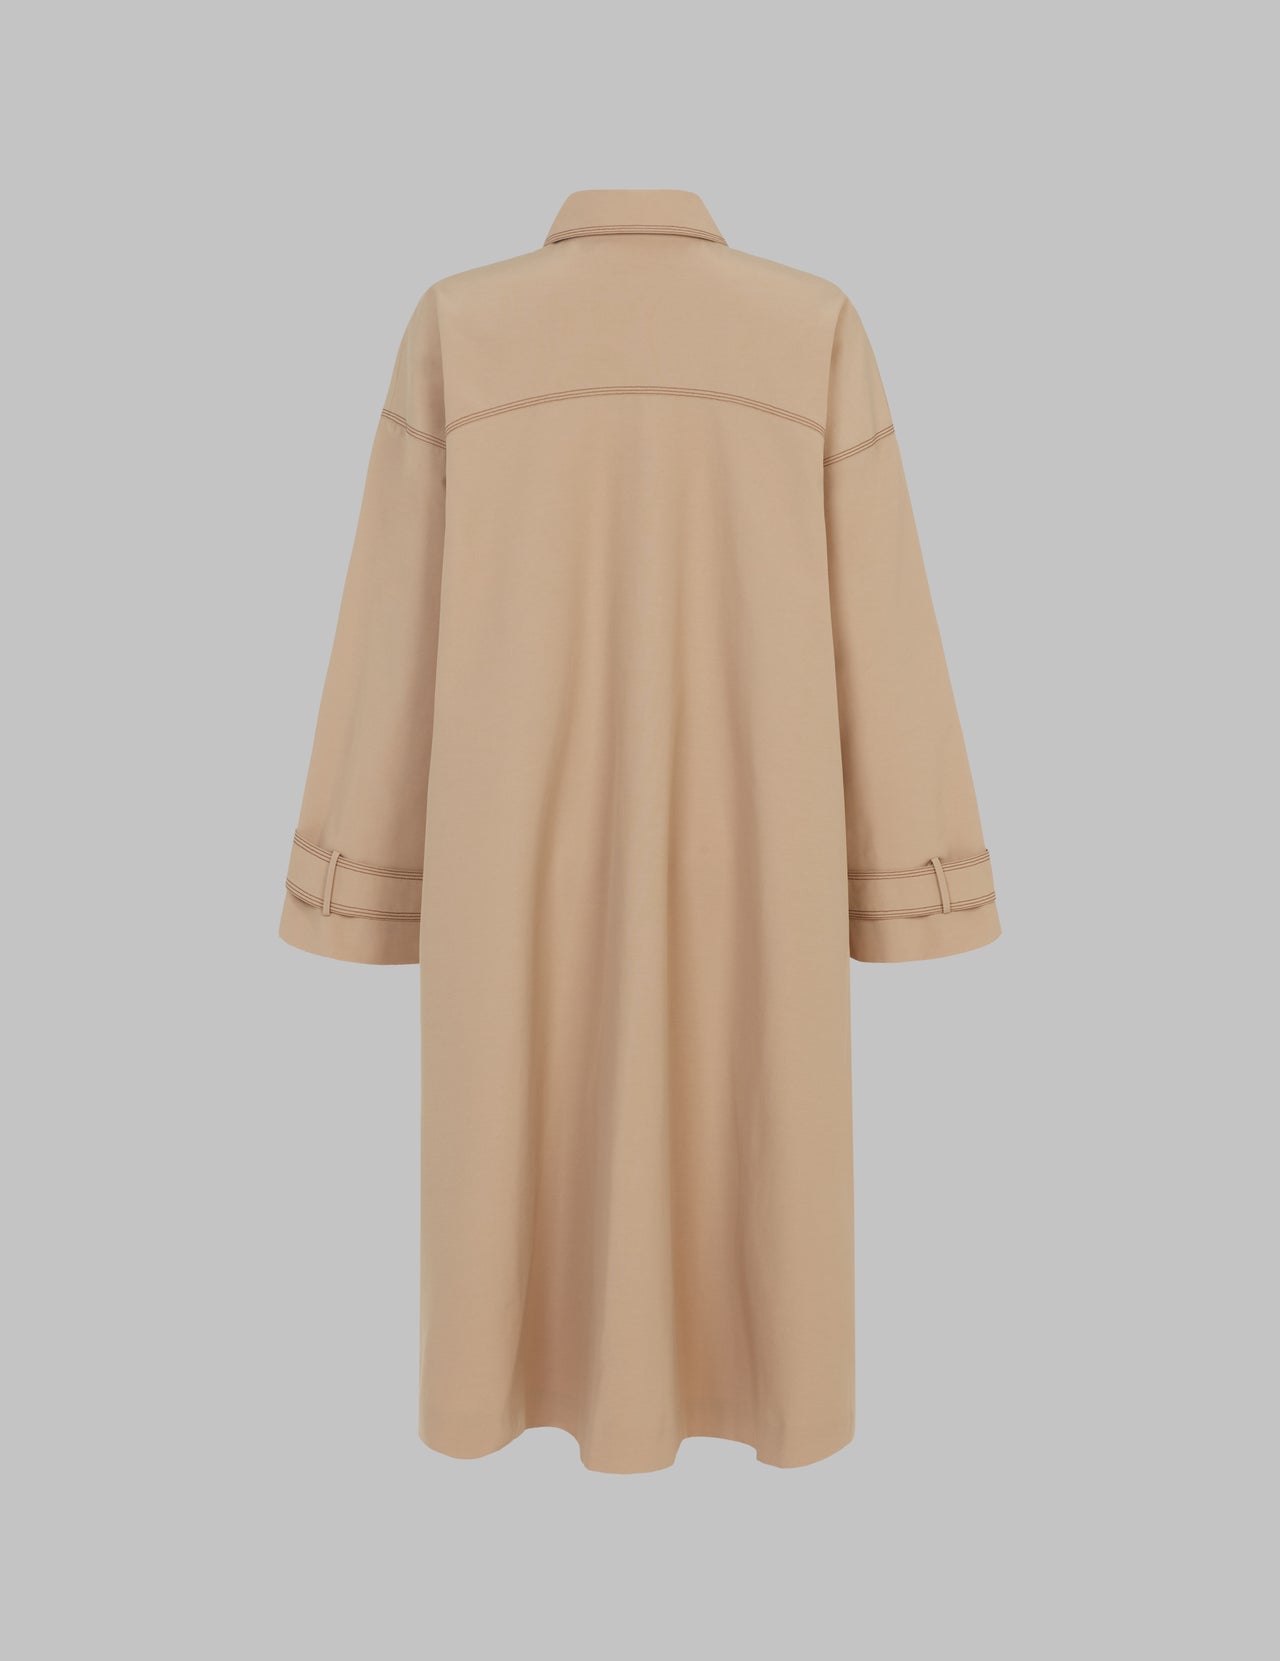  Sand Organic Cotton and Recycled Polyester Duster Coat  